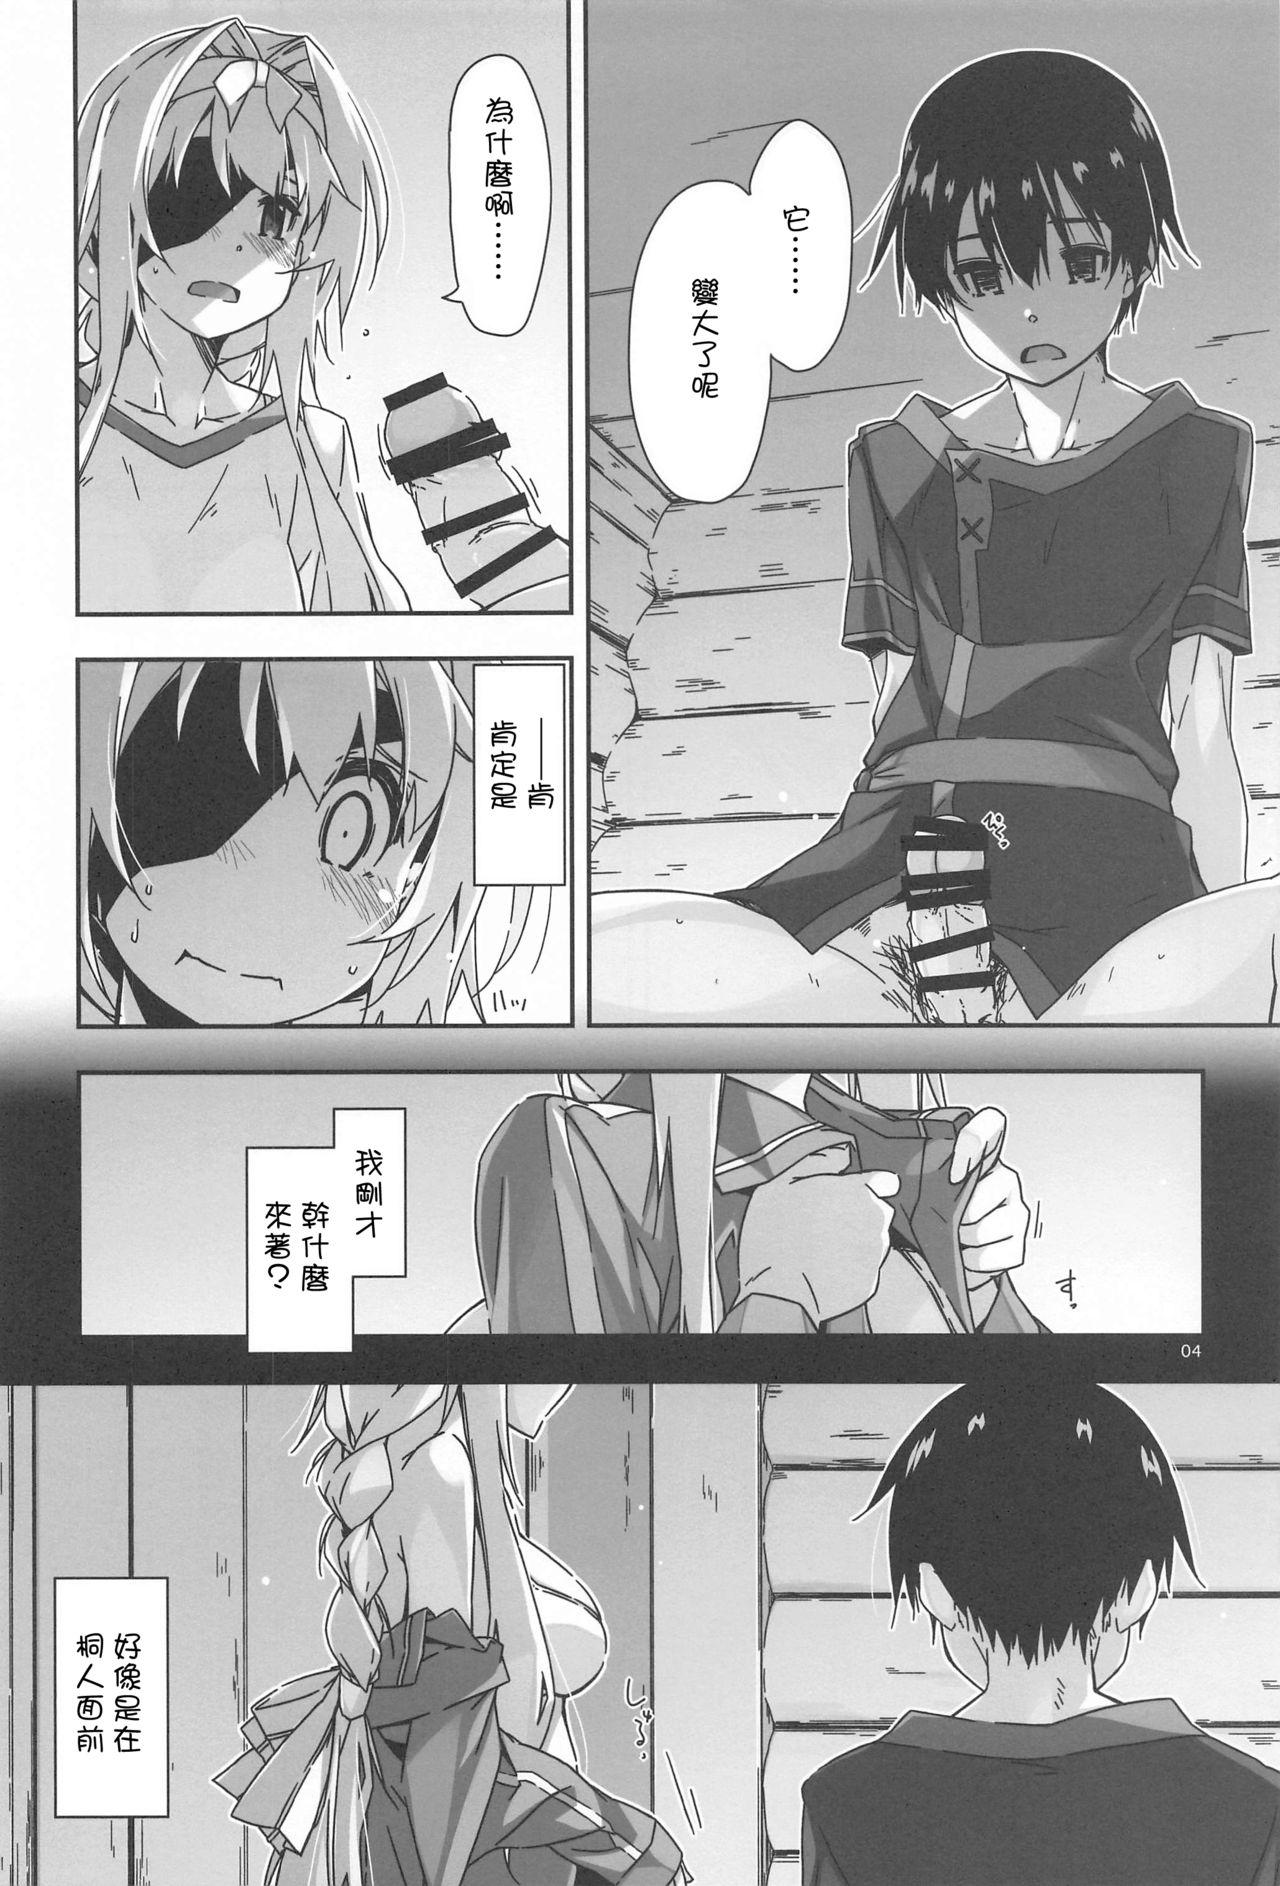 Assfuck Alice no Naisho - Sword art online Curves - Page 4